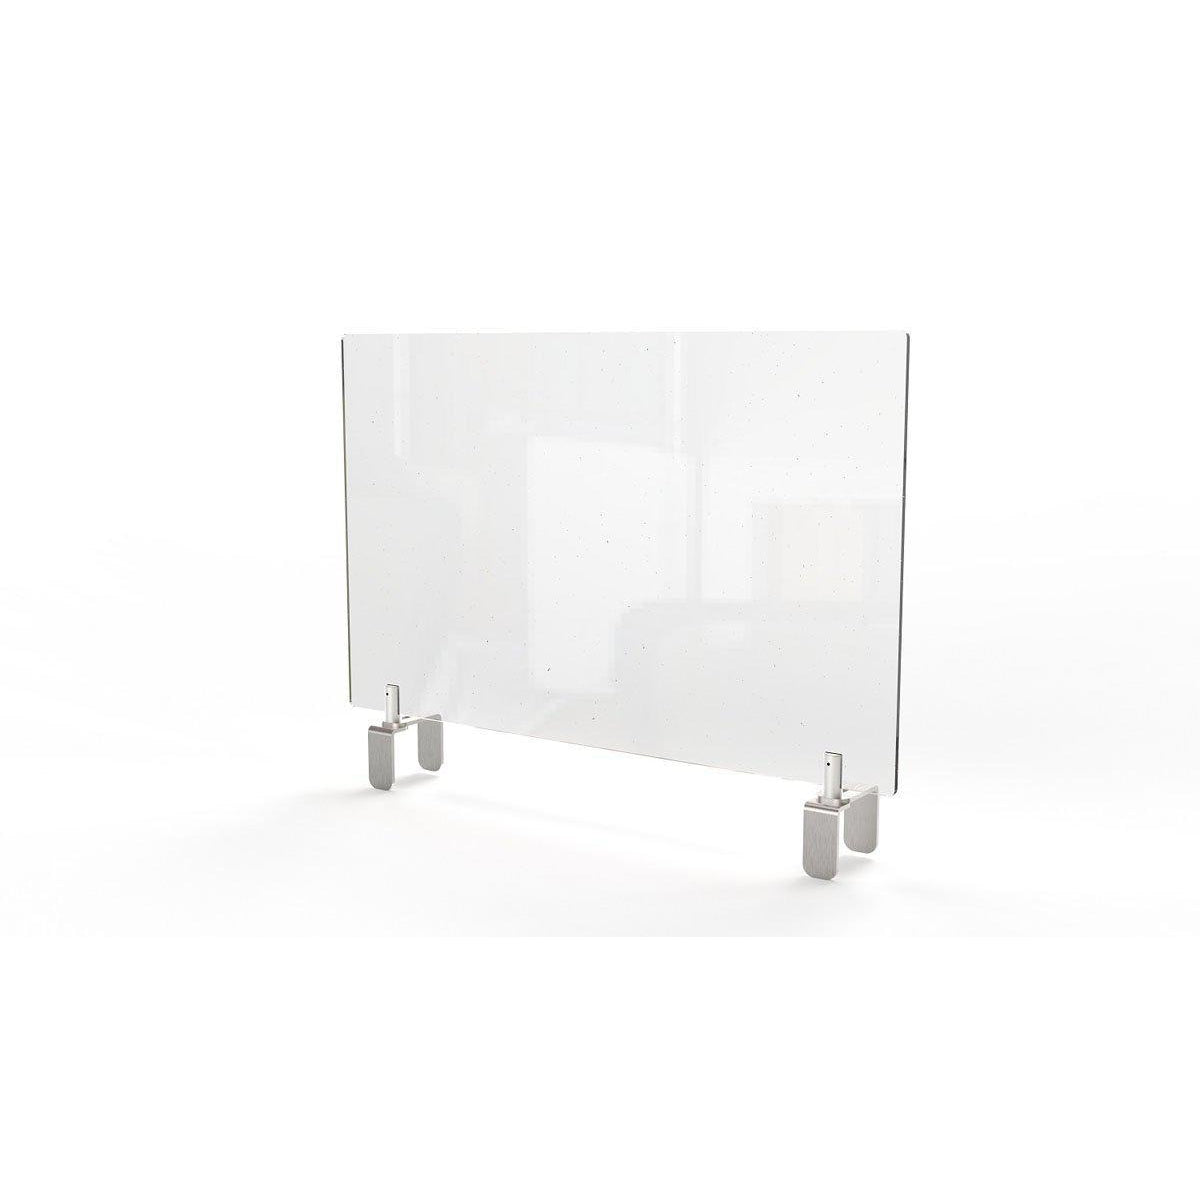 Clear Thermoplastic Partition & Cubicle Extender with Adjustable Clamp Attachment, 24"H x 29"W